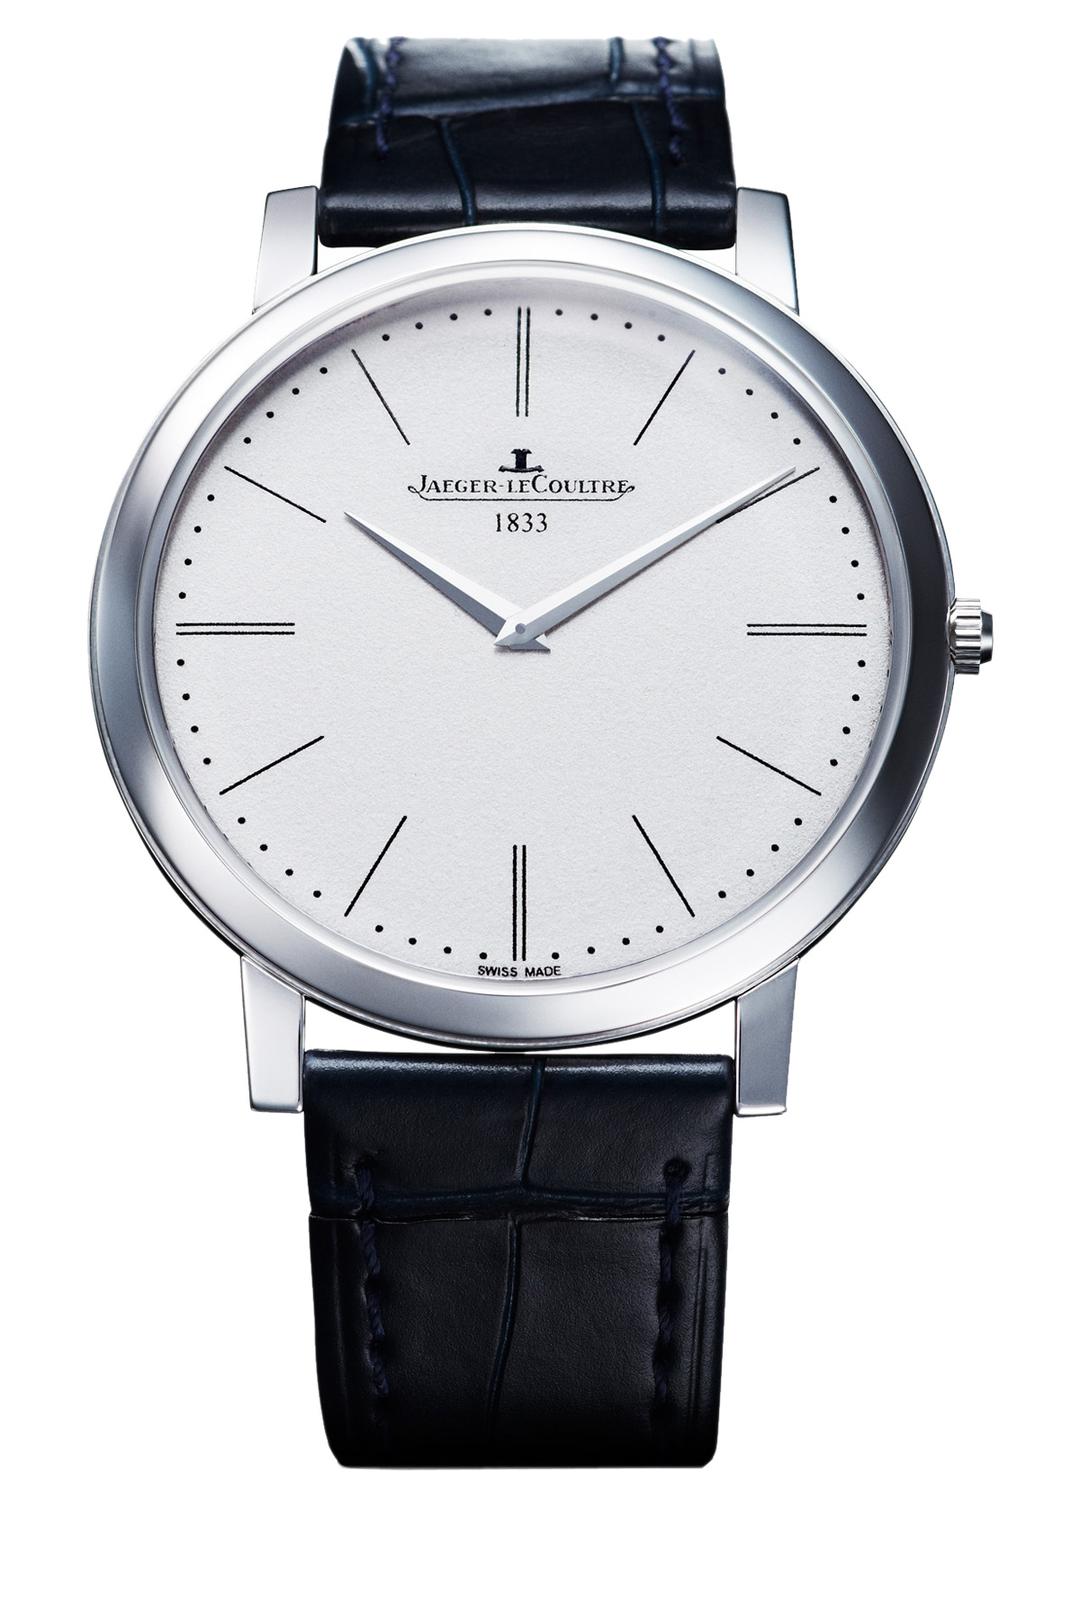 Master Ultra Thin Jubilee | Jaeger-LeCoultre | The Jewellery Editor